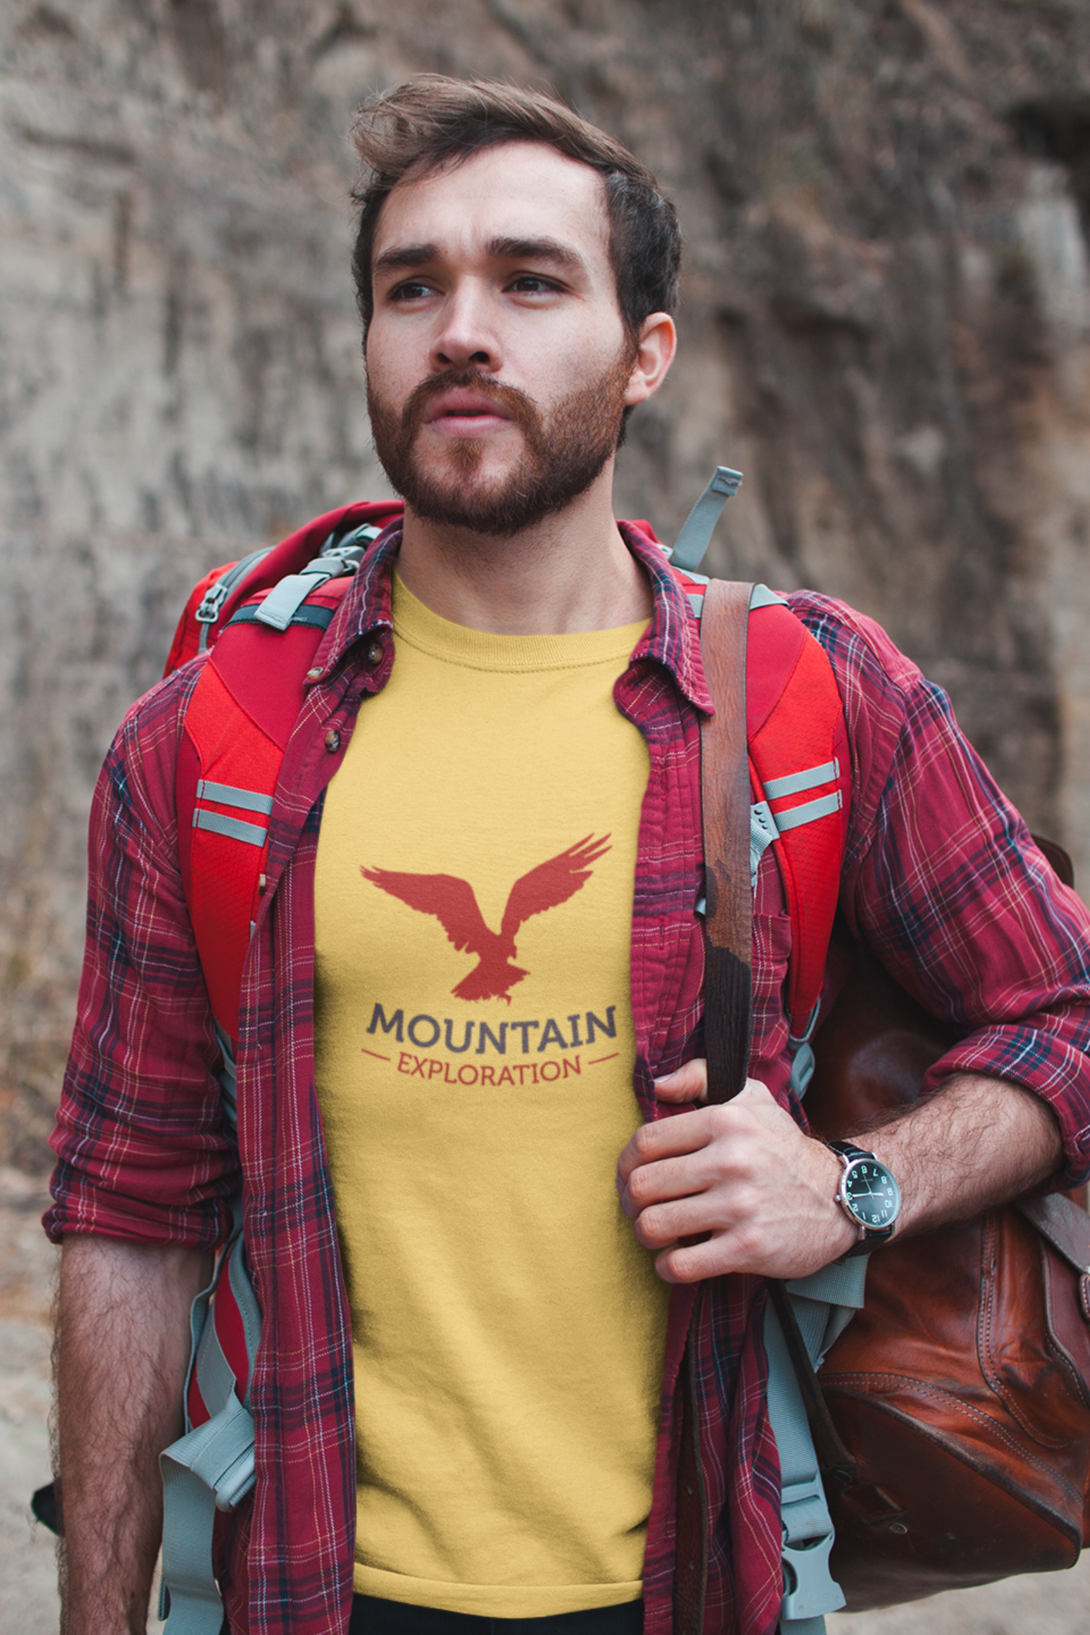 Mountain Exploration Printed T-Shirt For Men - WowWaves